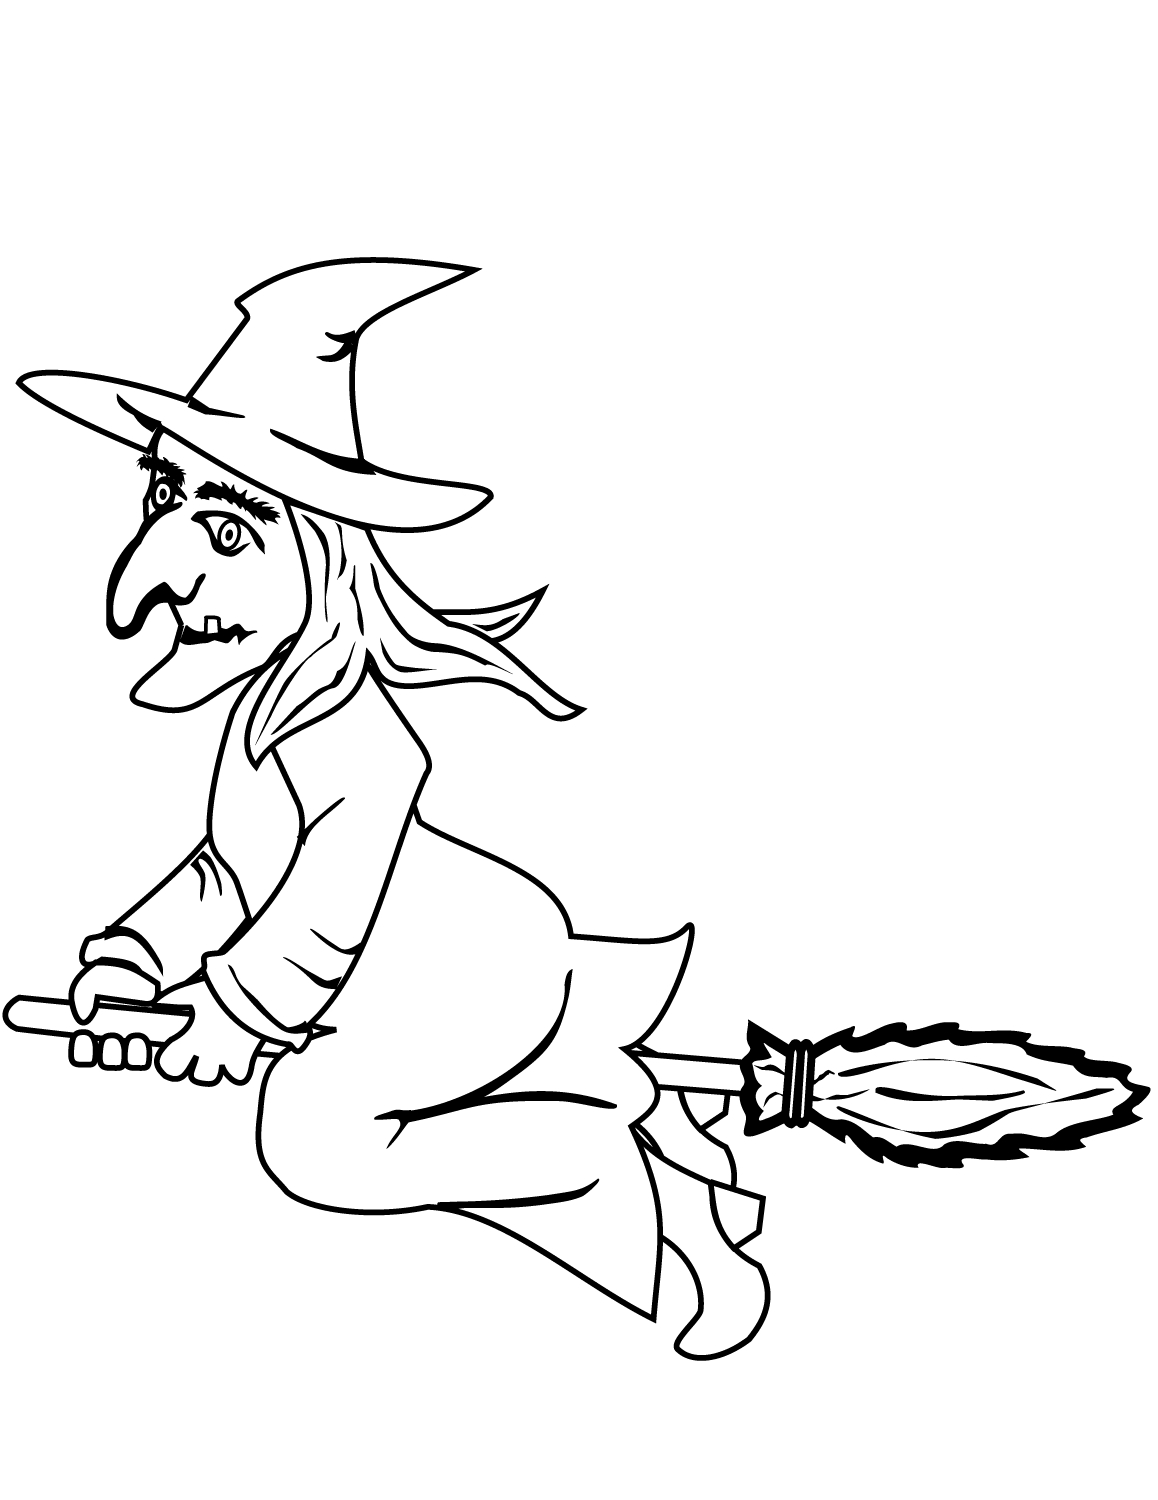 Halloween Witch On A Broom Halloween Coloring Page